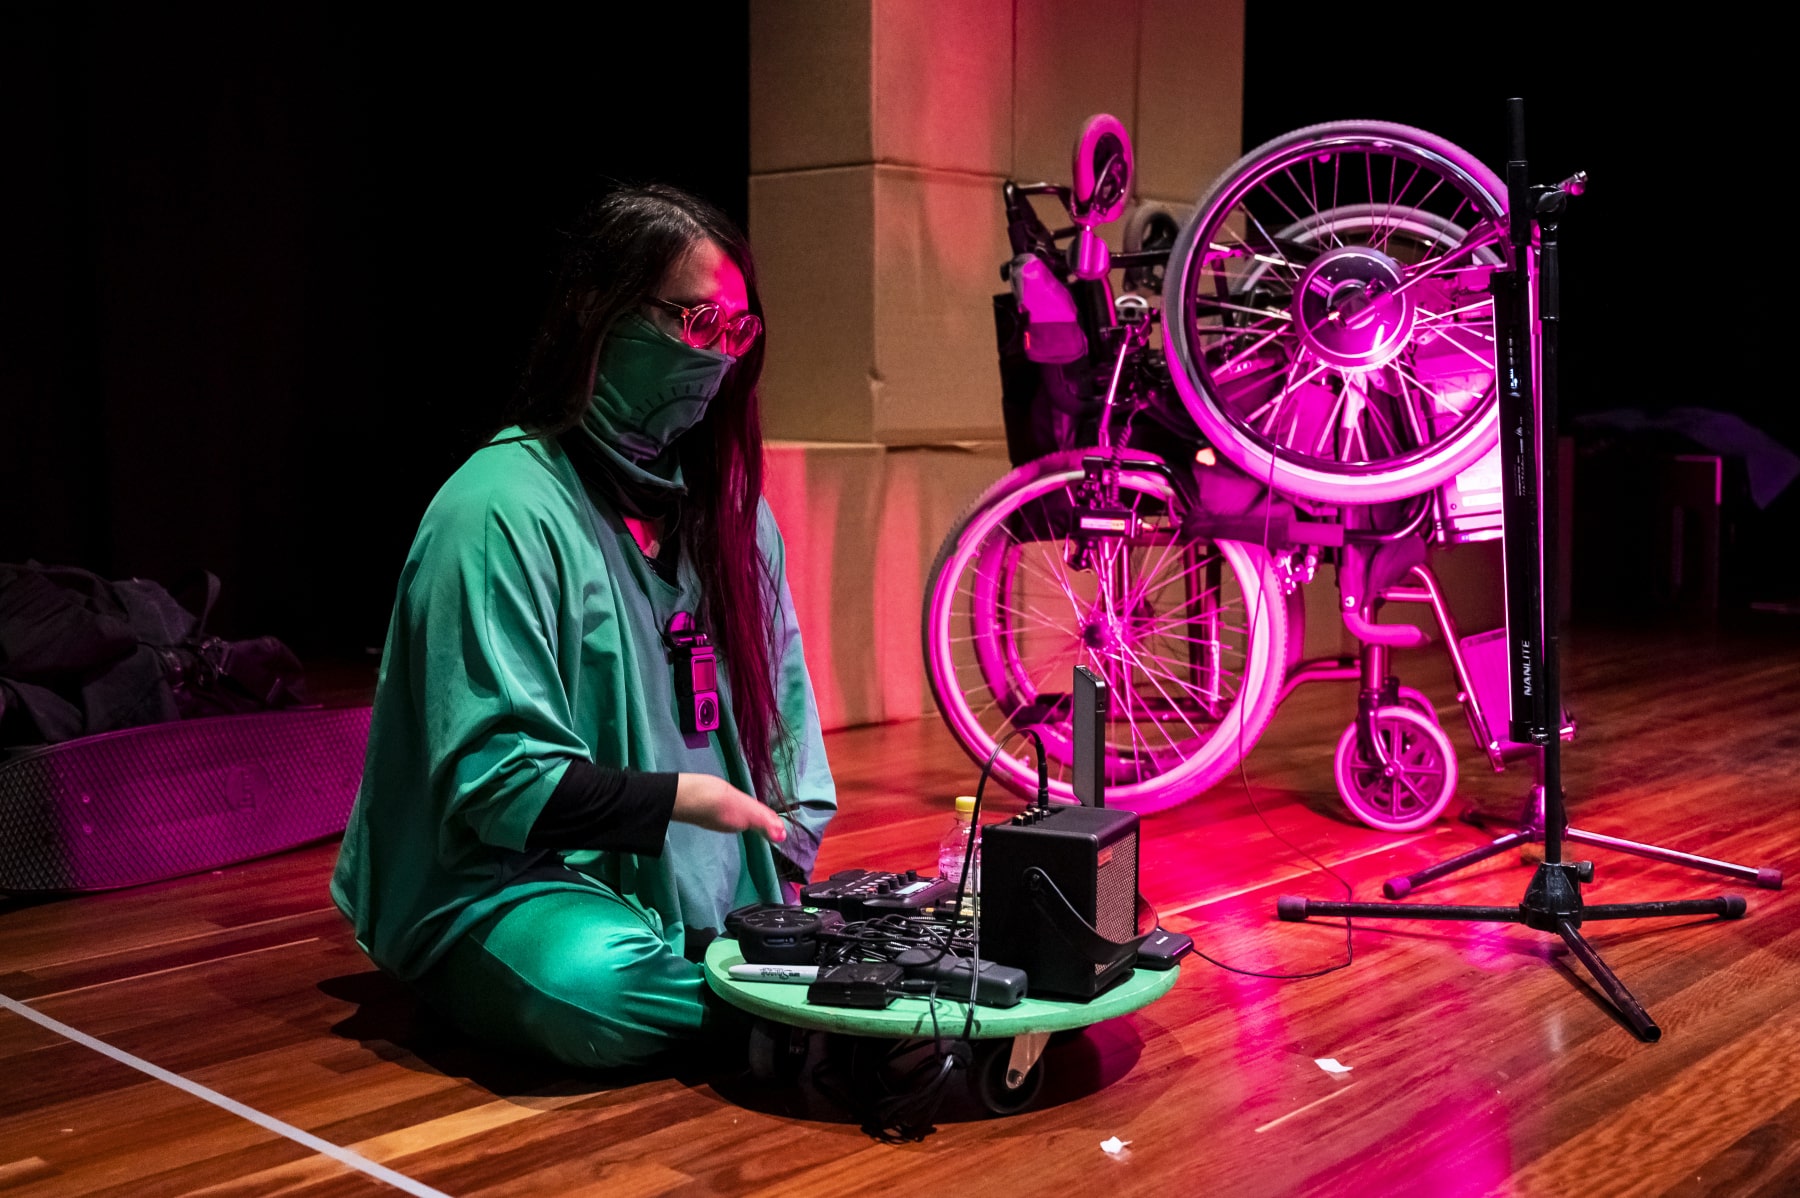 A person is sitting on the floor wearing green. They have long dark hair and glasses. In front of them is music mixing equipment. In the background there is a wheelchair that is lit up with pink lights and a stack of cardboad boxes.